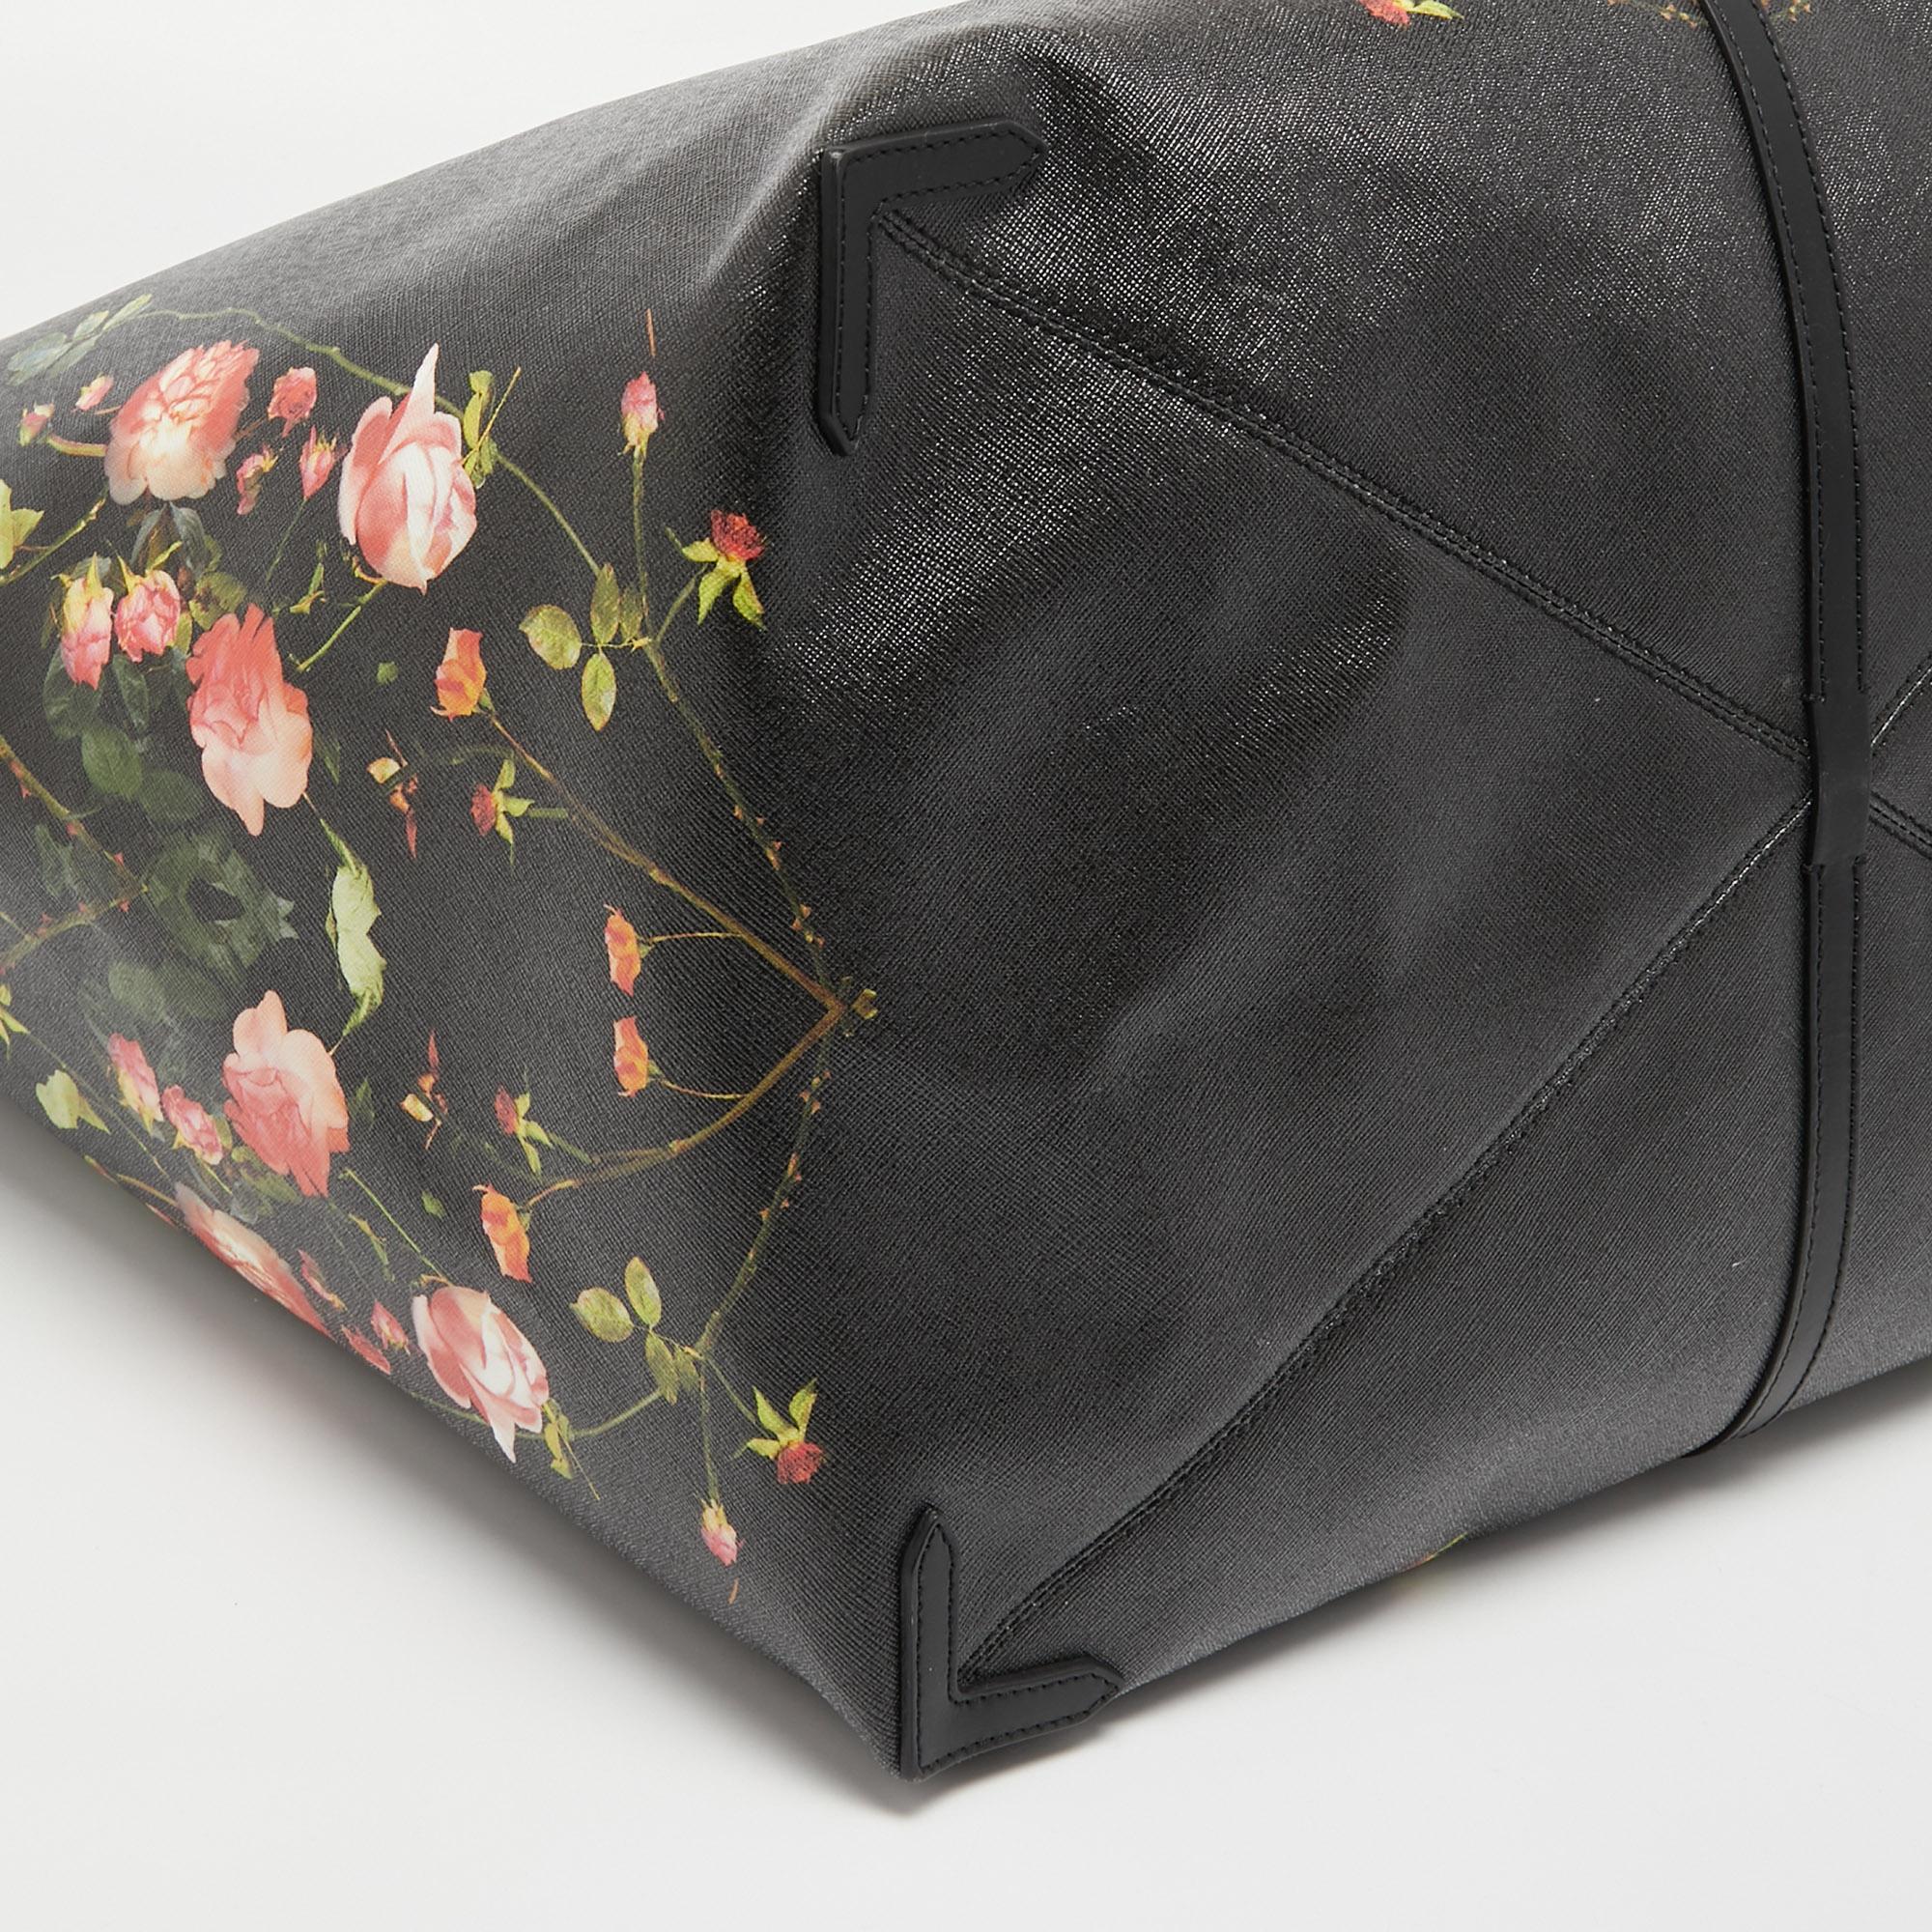 Burberry Black Floral Print Coated Canvas XL Beach Tote 5